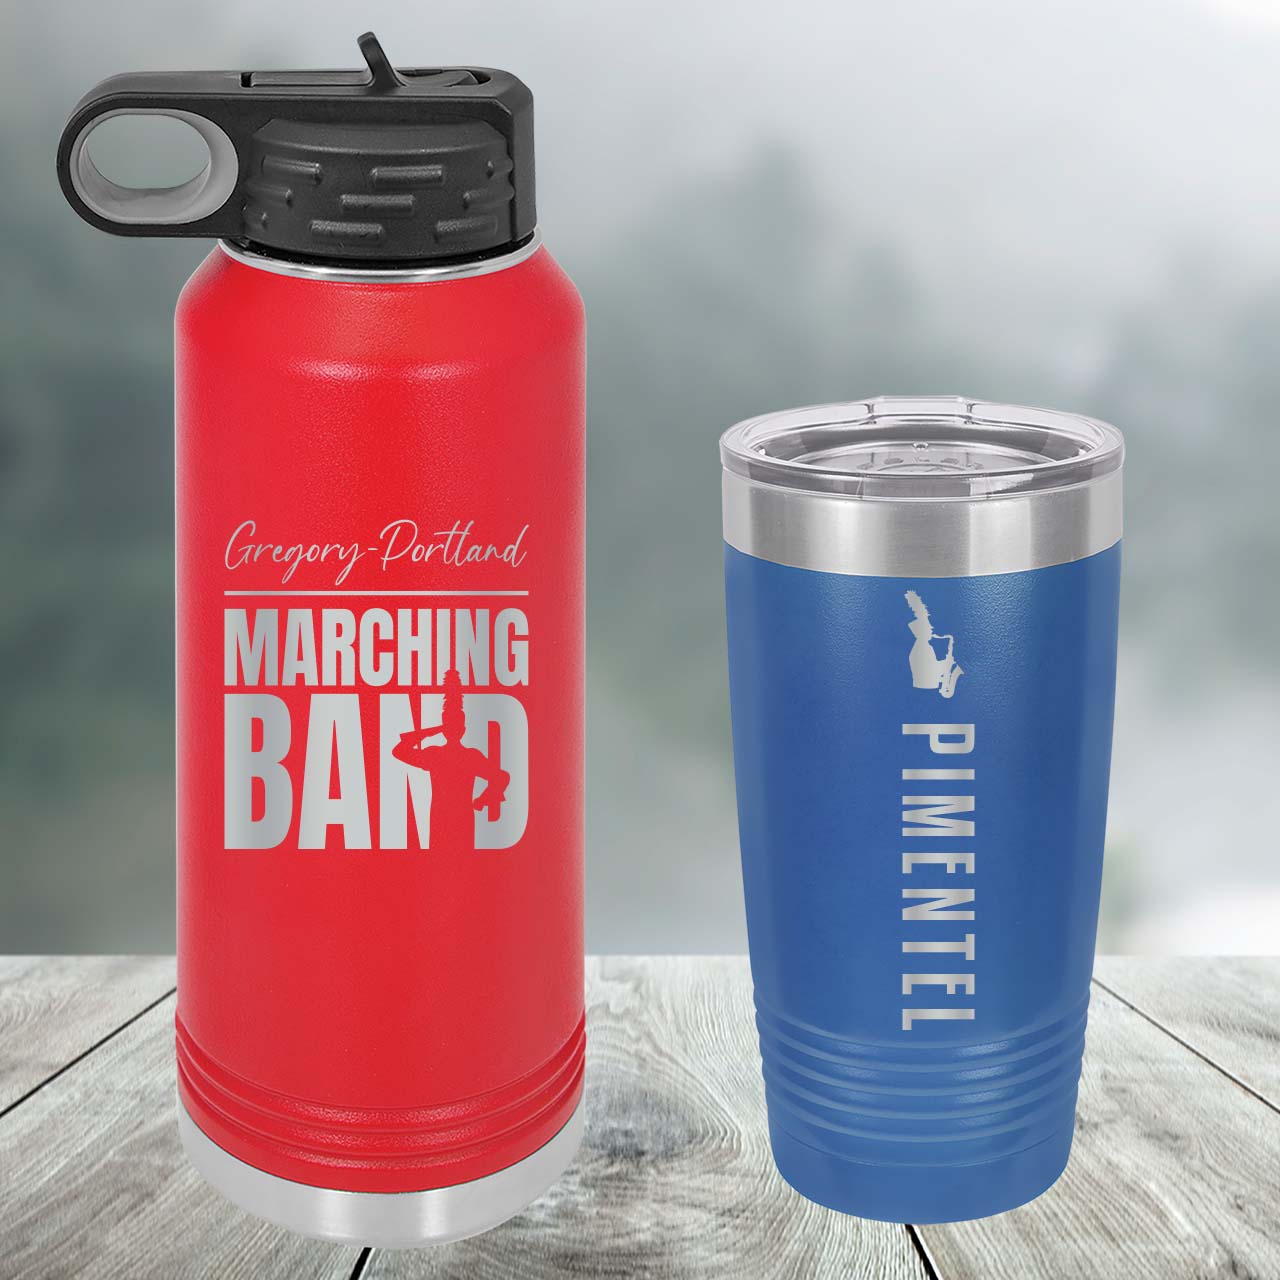 Color Guard Customized Water Bottle